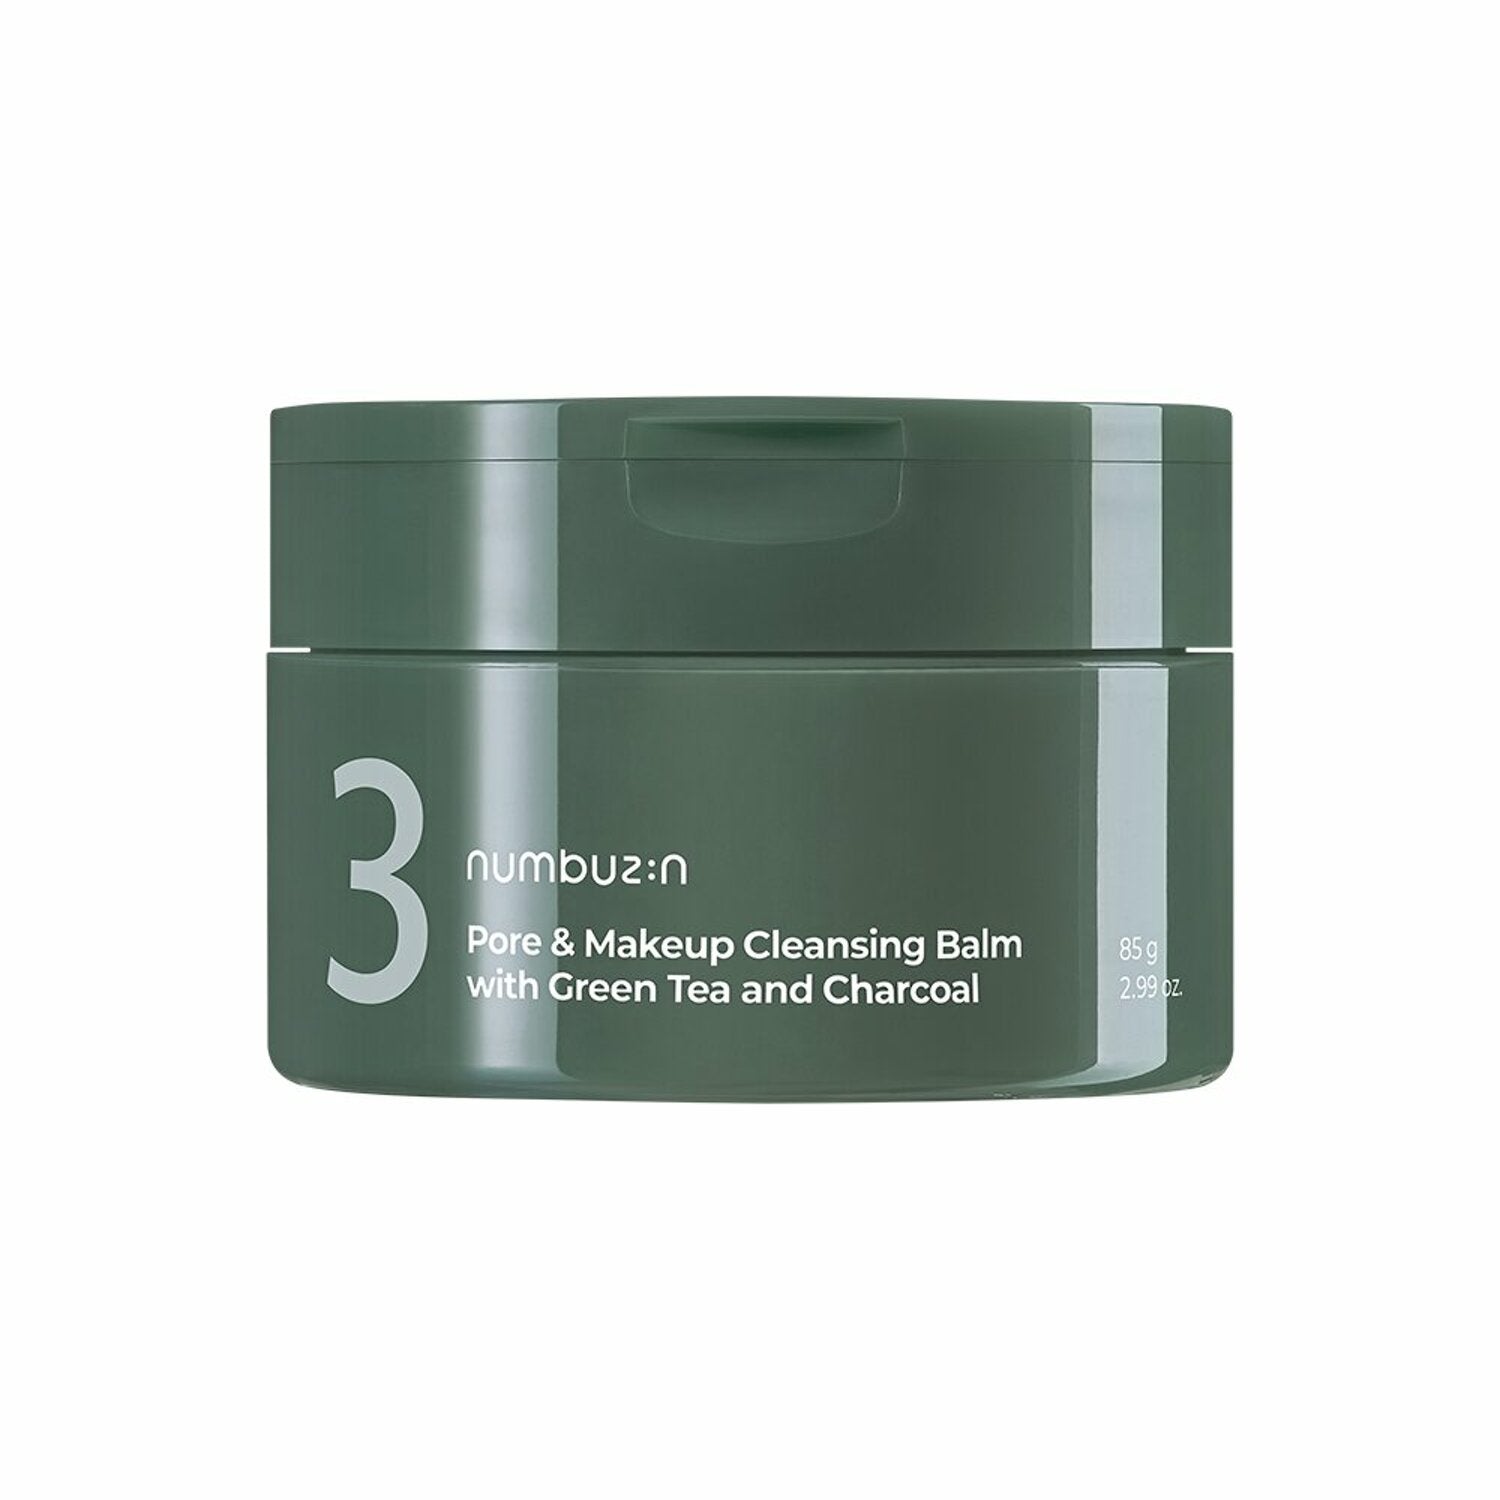 numbuzin No.3 Pore & Makeup Cleansing Balm with Green Tea and Charcoal 85g